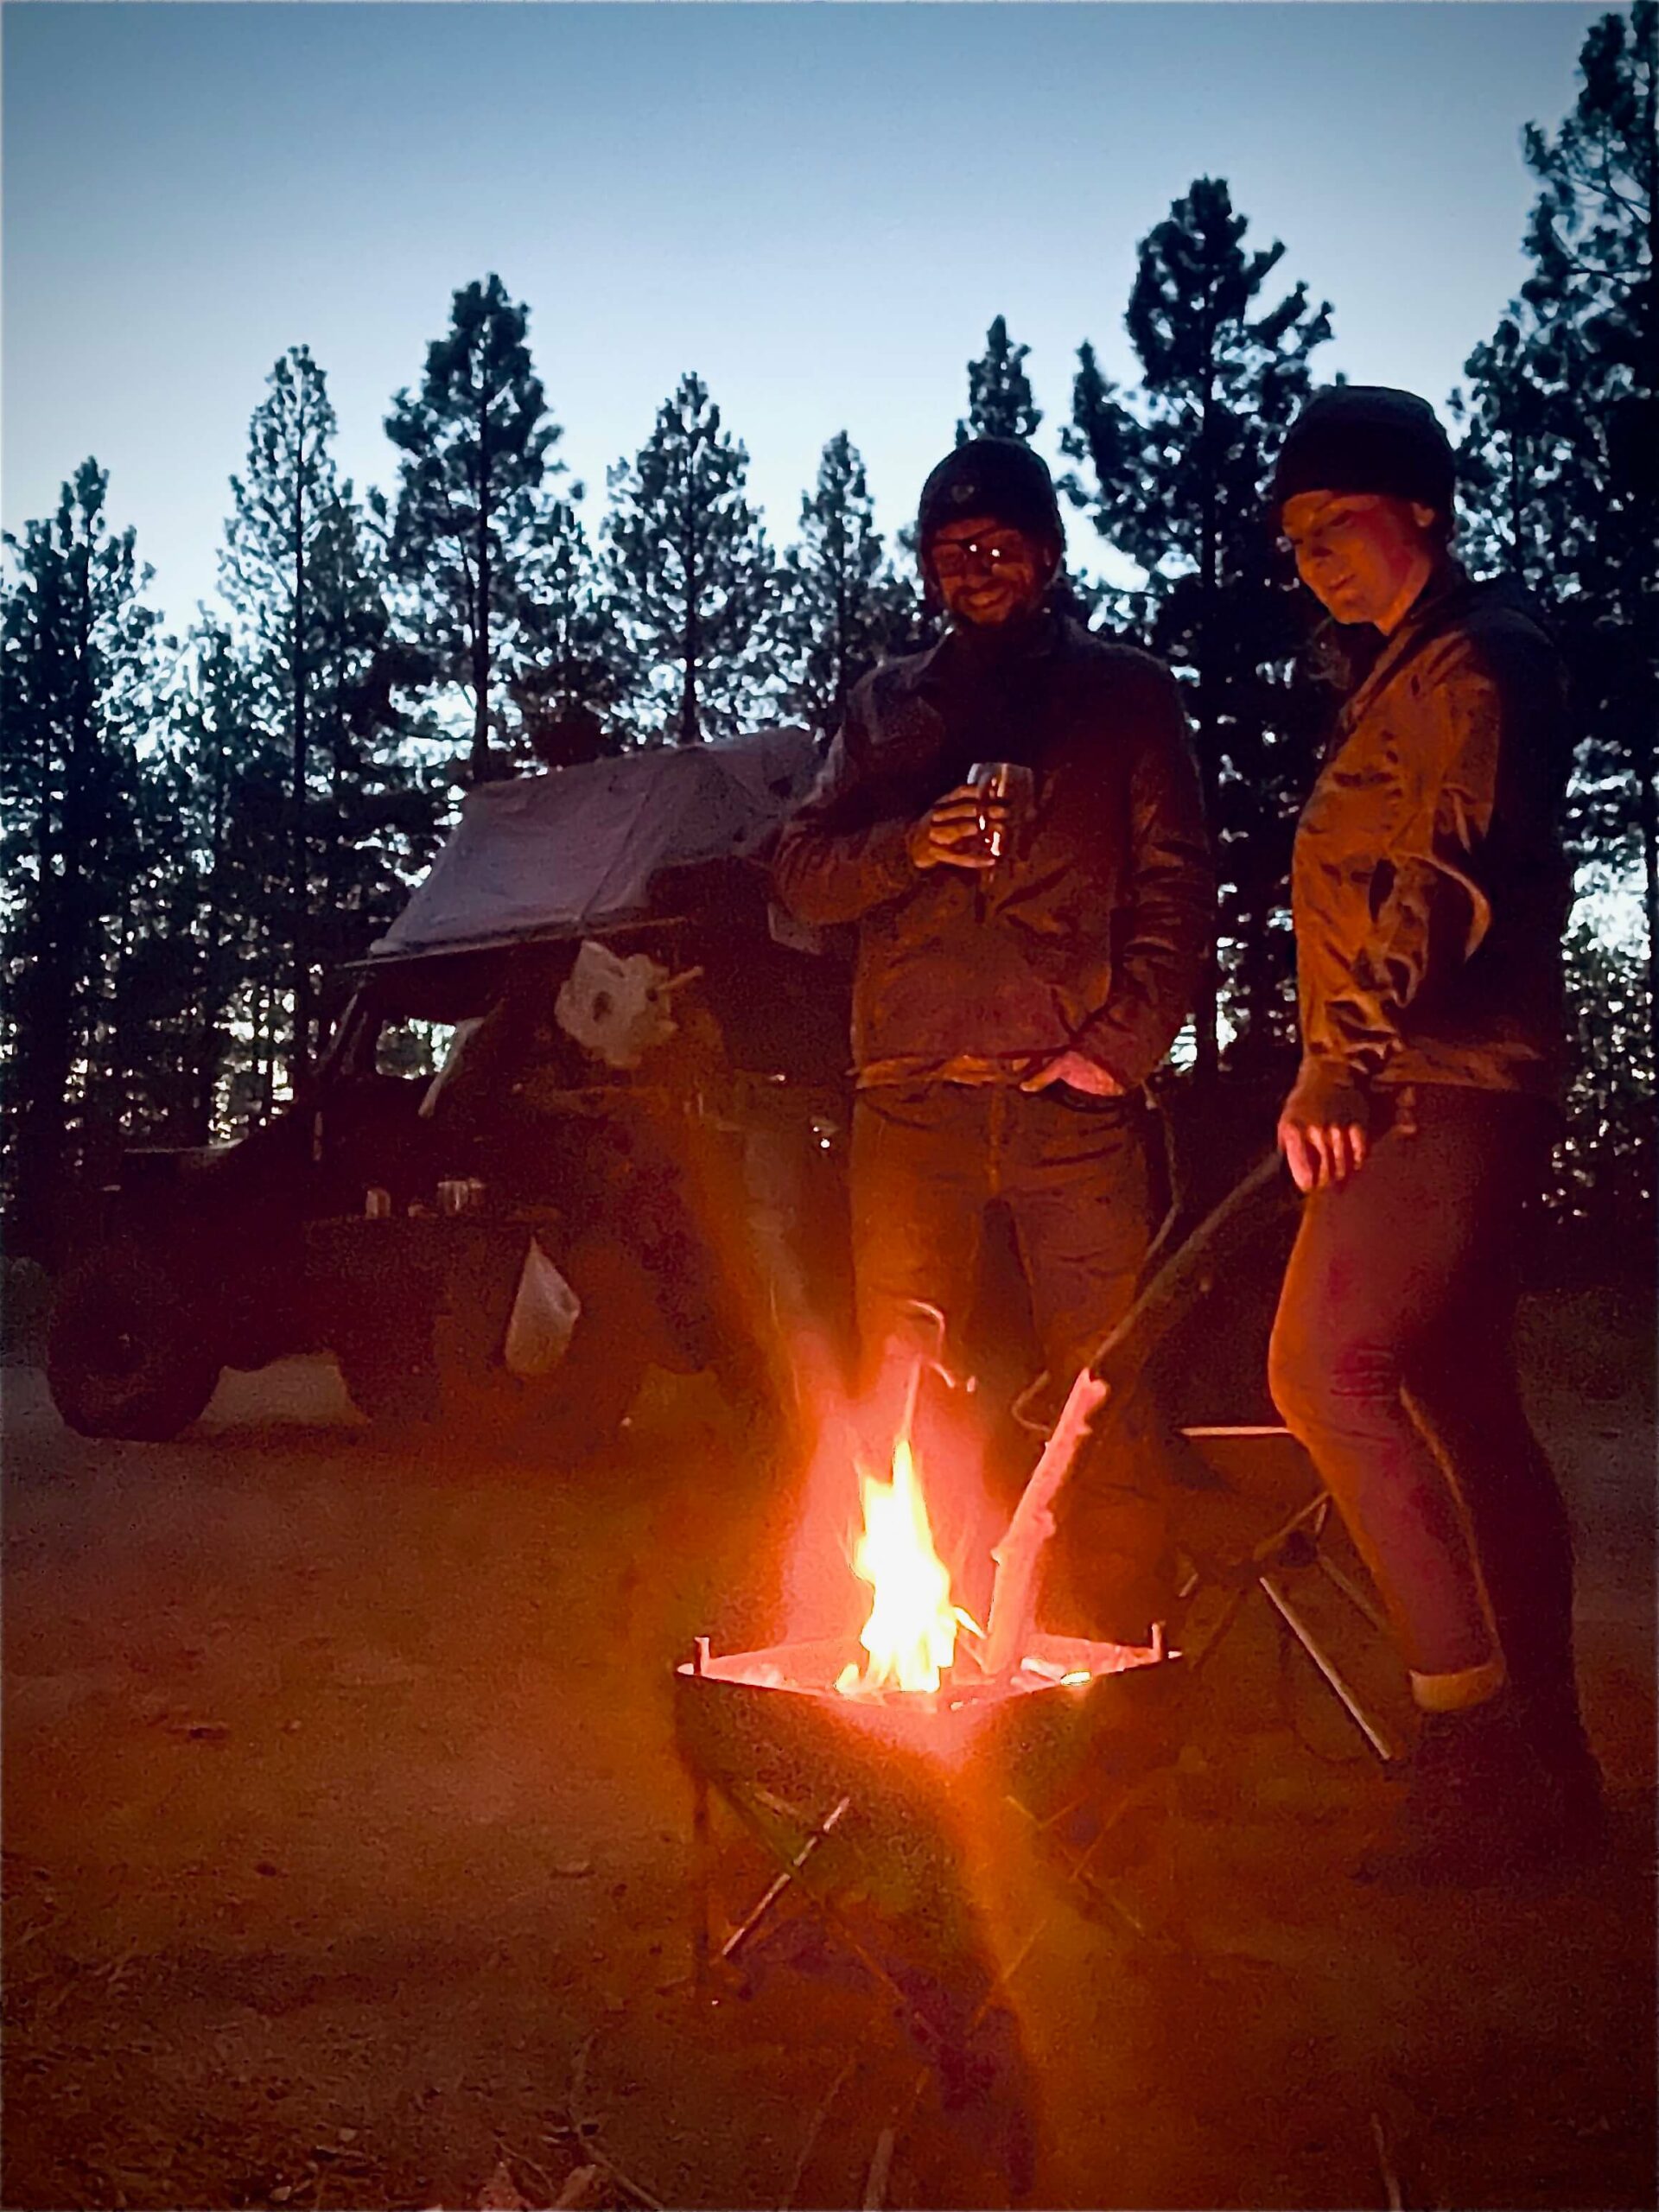 Blake and Chelsea stand in front of a campfire during an overlanding adventure.